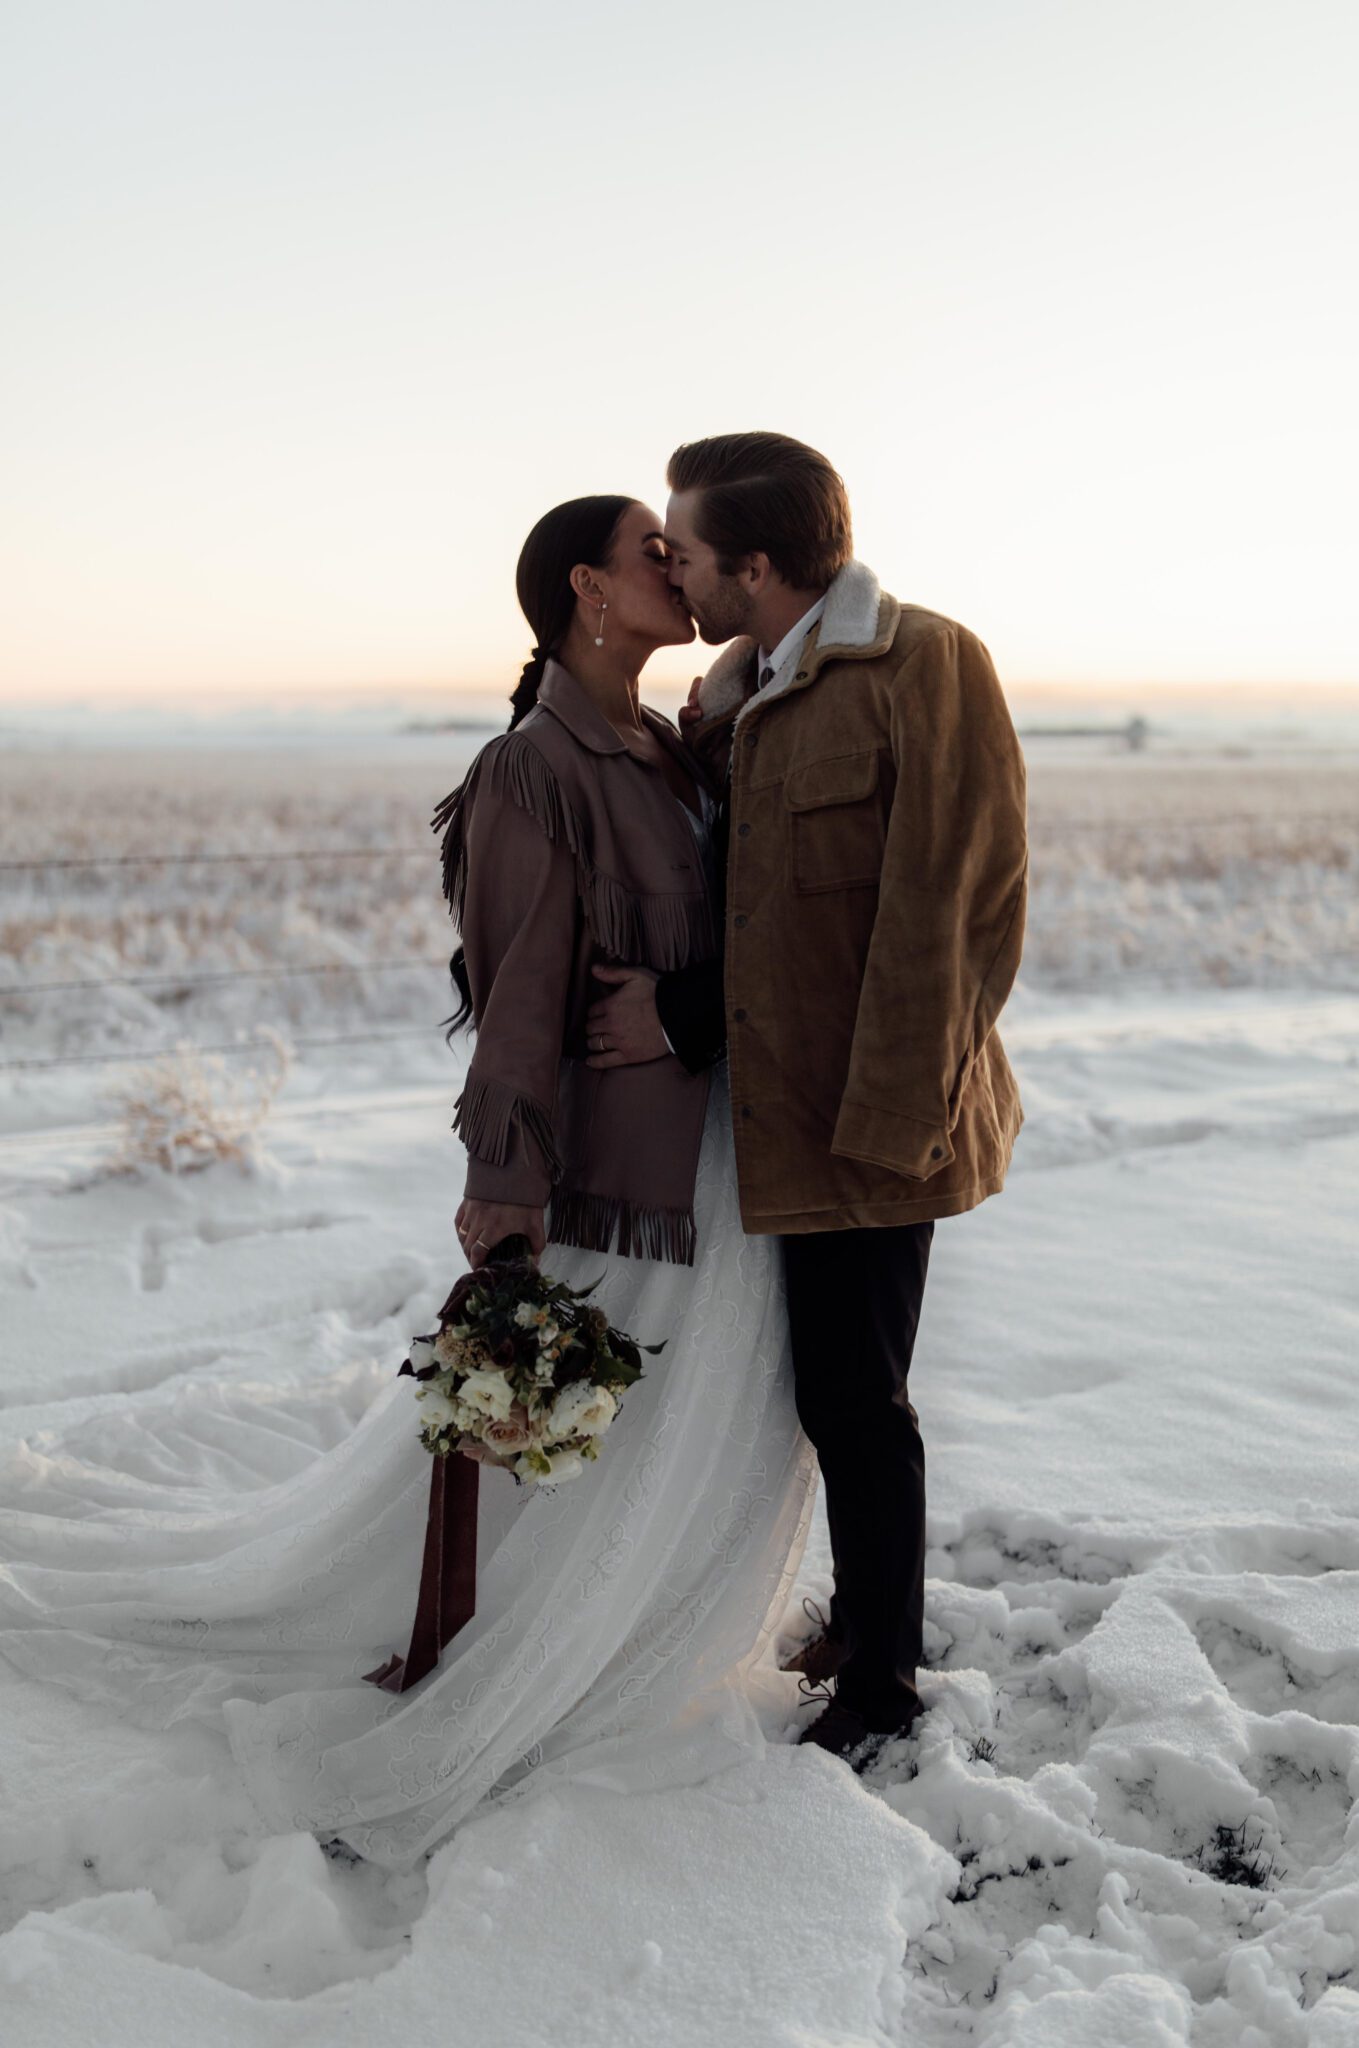 Wedding Inspiration With An Updated Take on Country Chic Wedding Style at Countryside Barn in Lethbridge Alberta, portrait of bride and groom kissing at sunset, winter wedding inspiration, groom's vintage bolo tie and thrifted suede fringe jacket from Alice & Irene. 